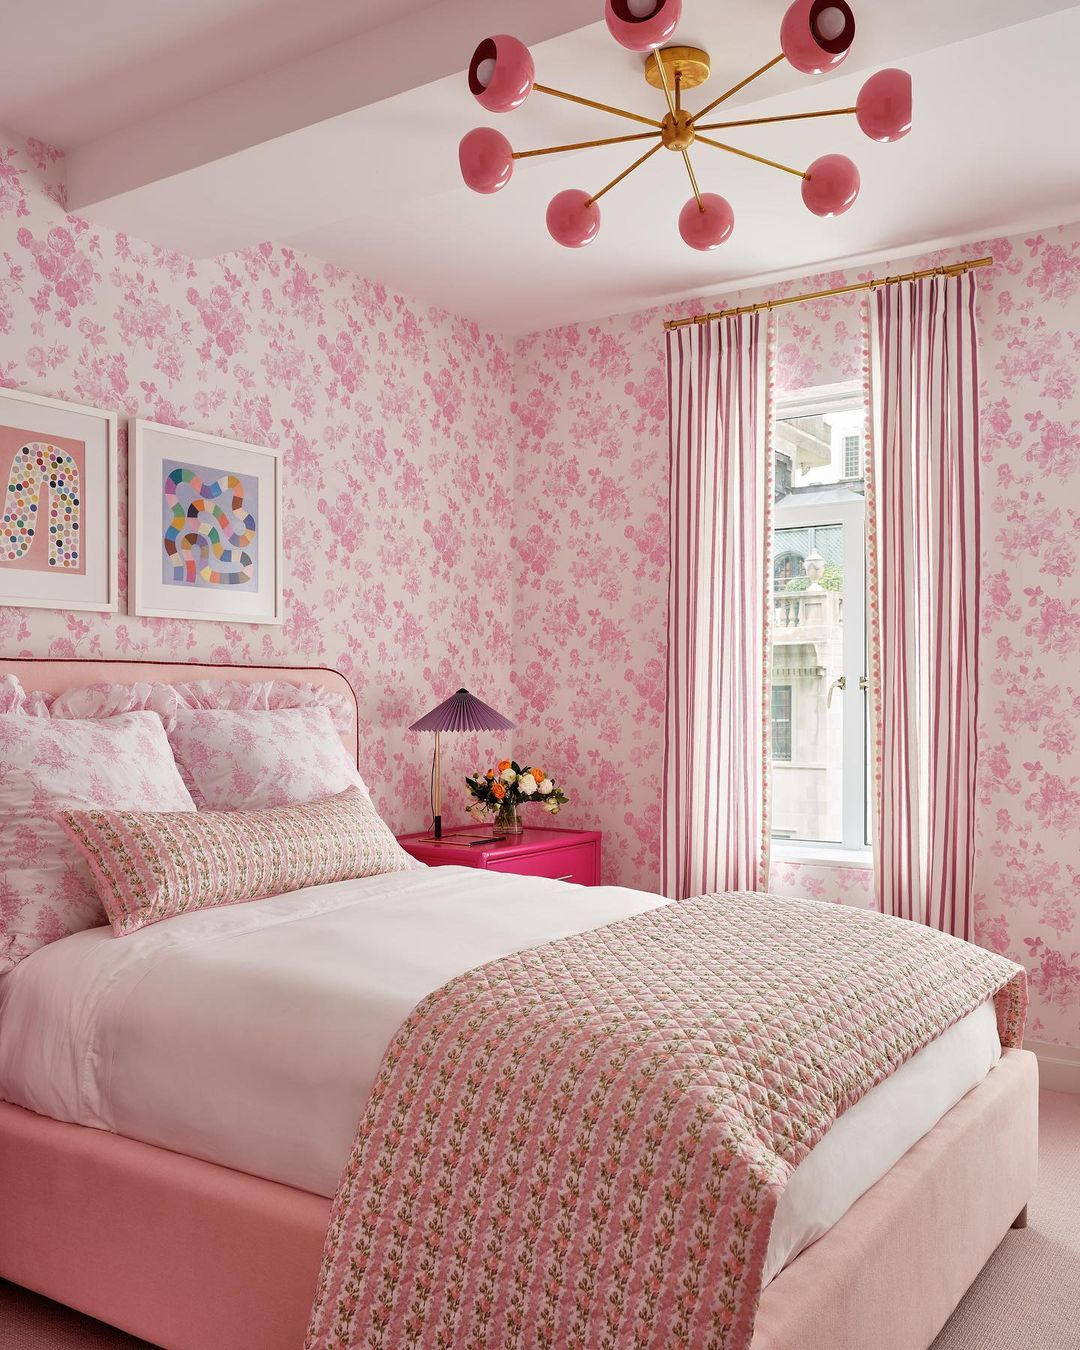 Use Floral Wallpaper: Pink and white